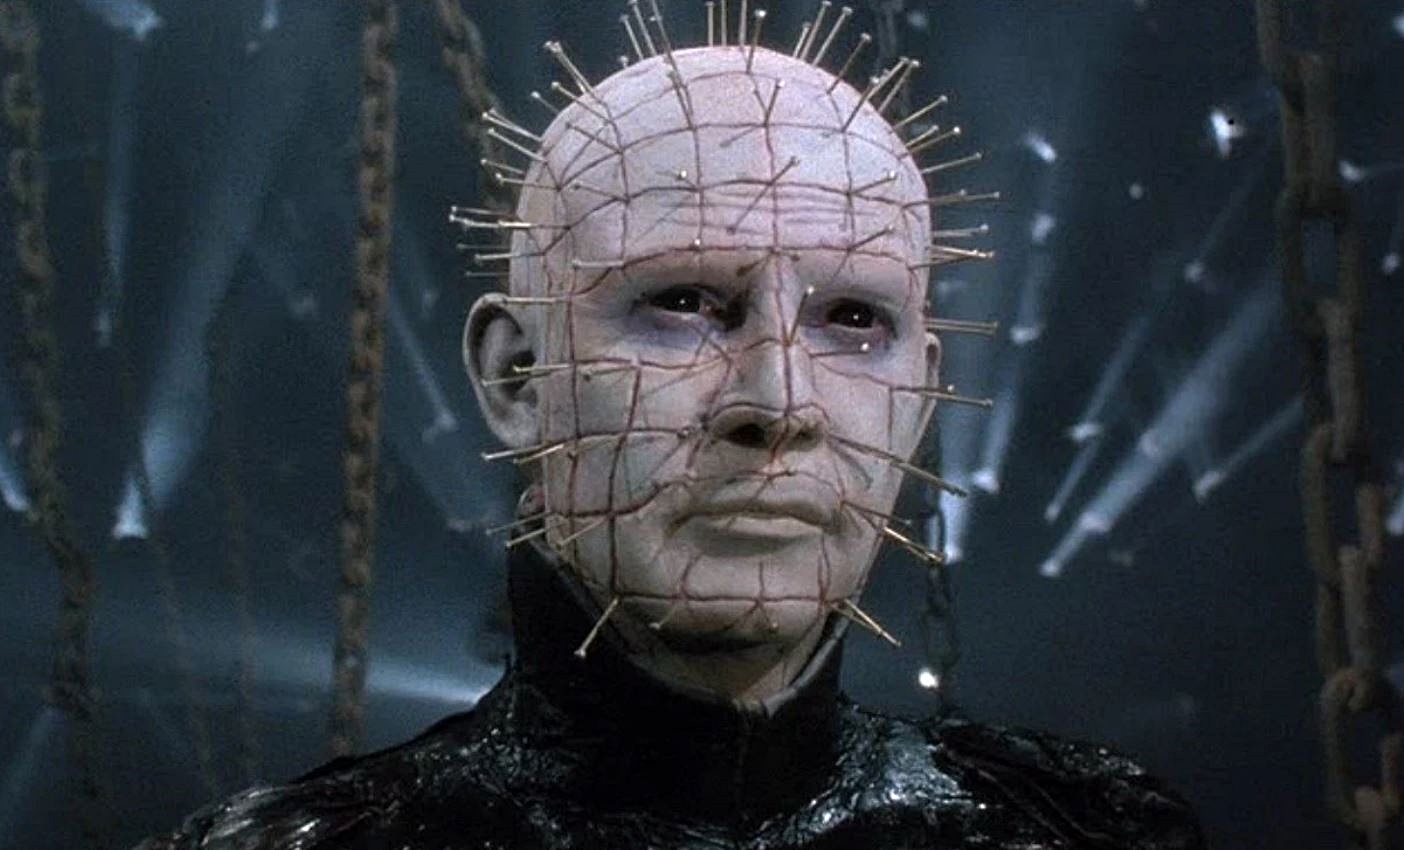 Hellraiser Creator, Clive Barker, Joins Series At HBO As An Executive Producer